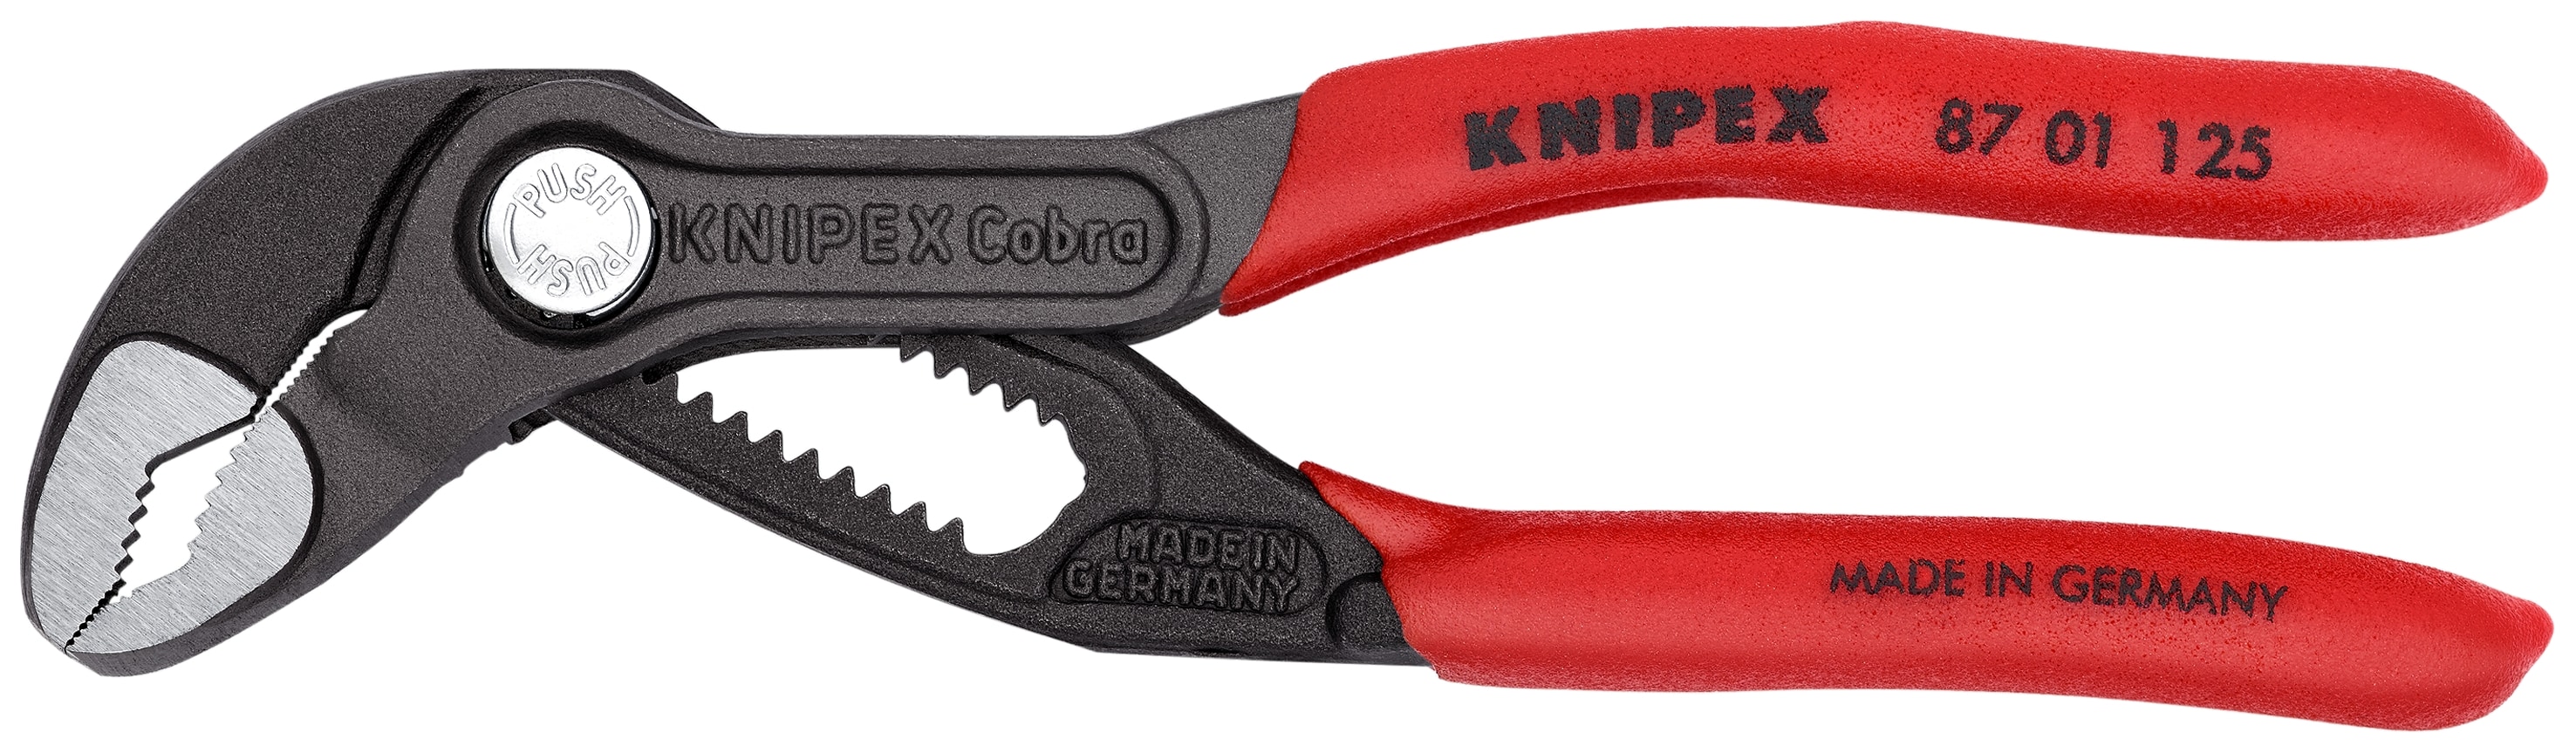 Knipex 2 Pc Mini Pliers in Belt Pouch - Cobra® and Needle-Nose